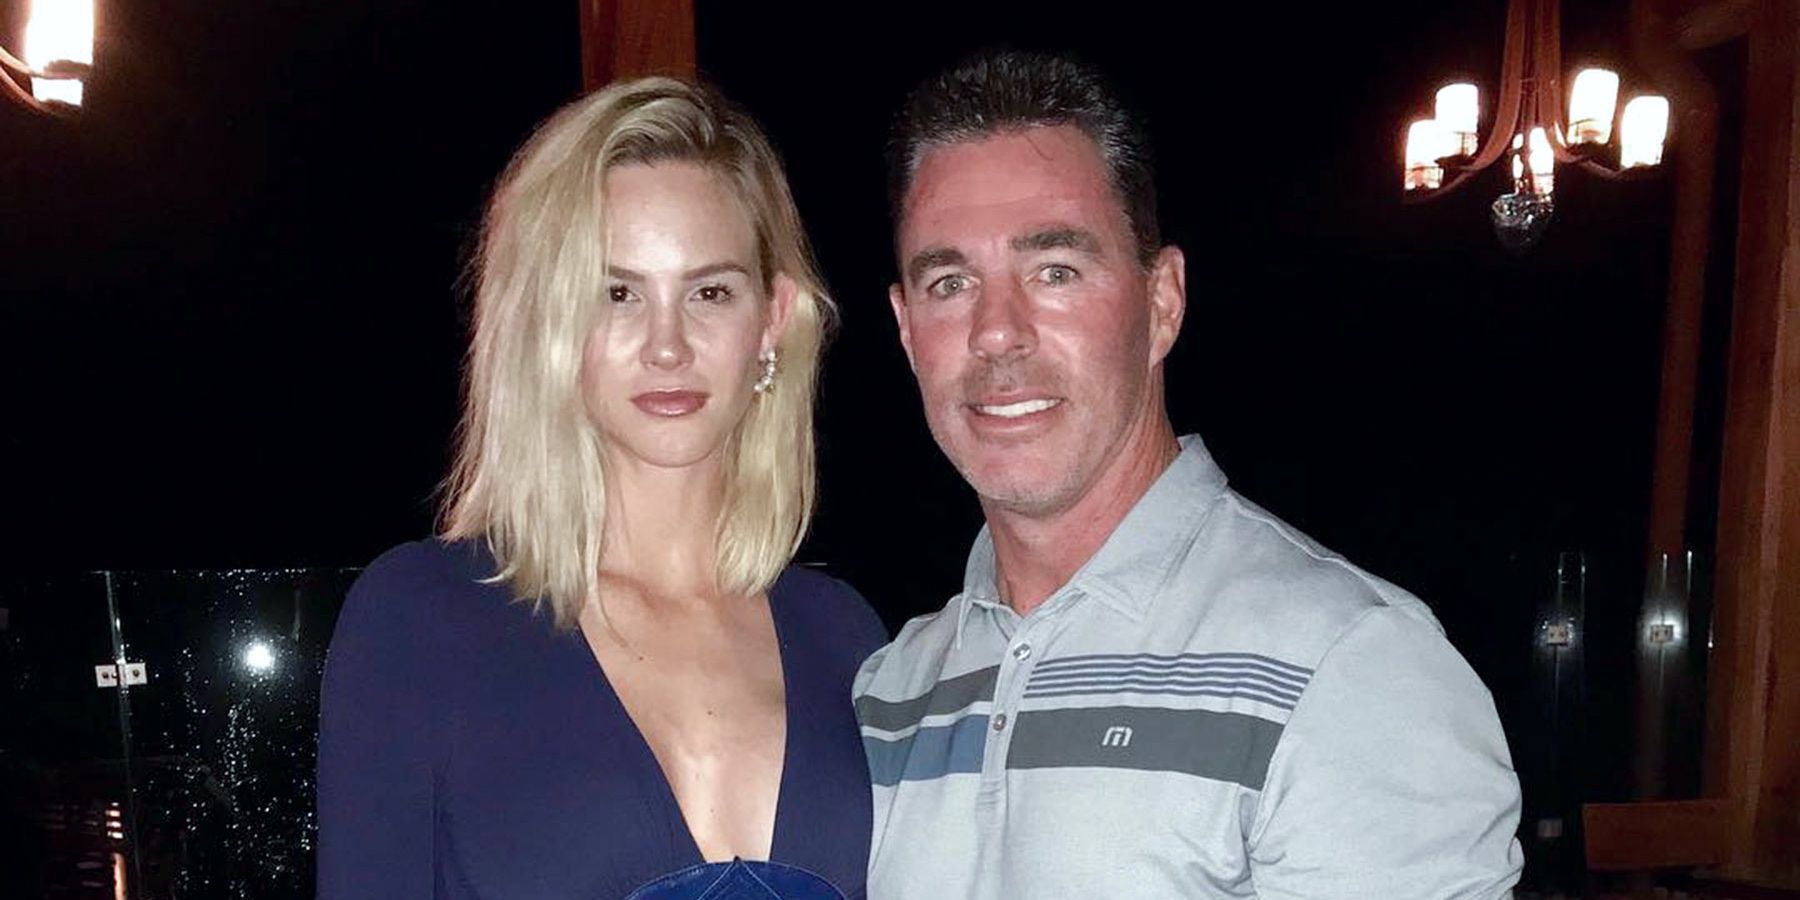 Meghan King and Jim Edmonds from The Real Housewives of Orange County